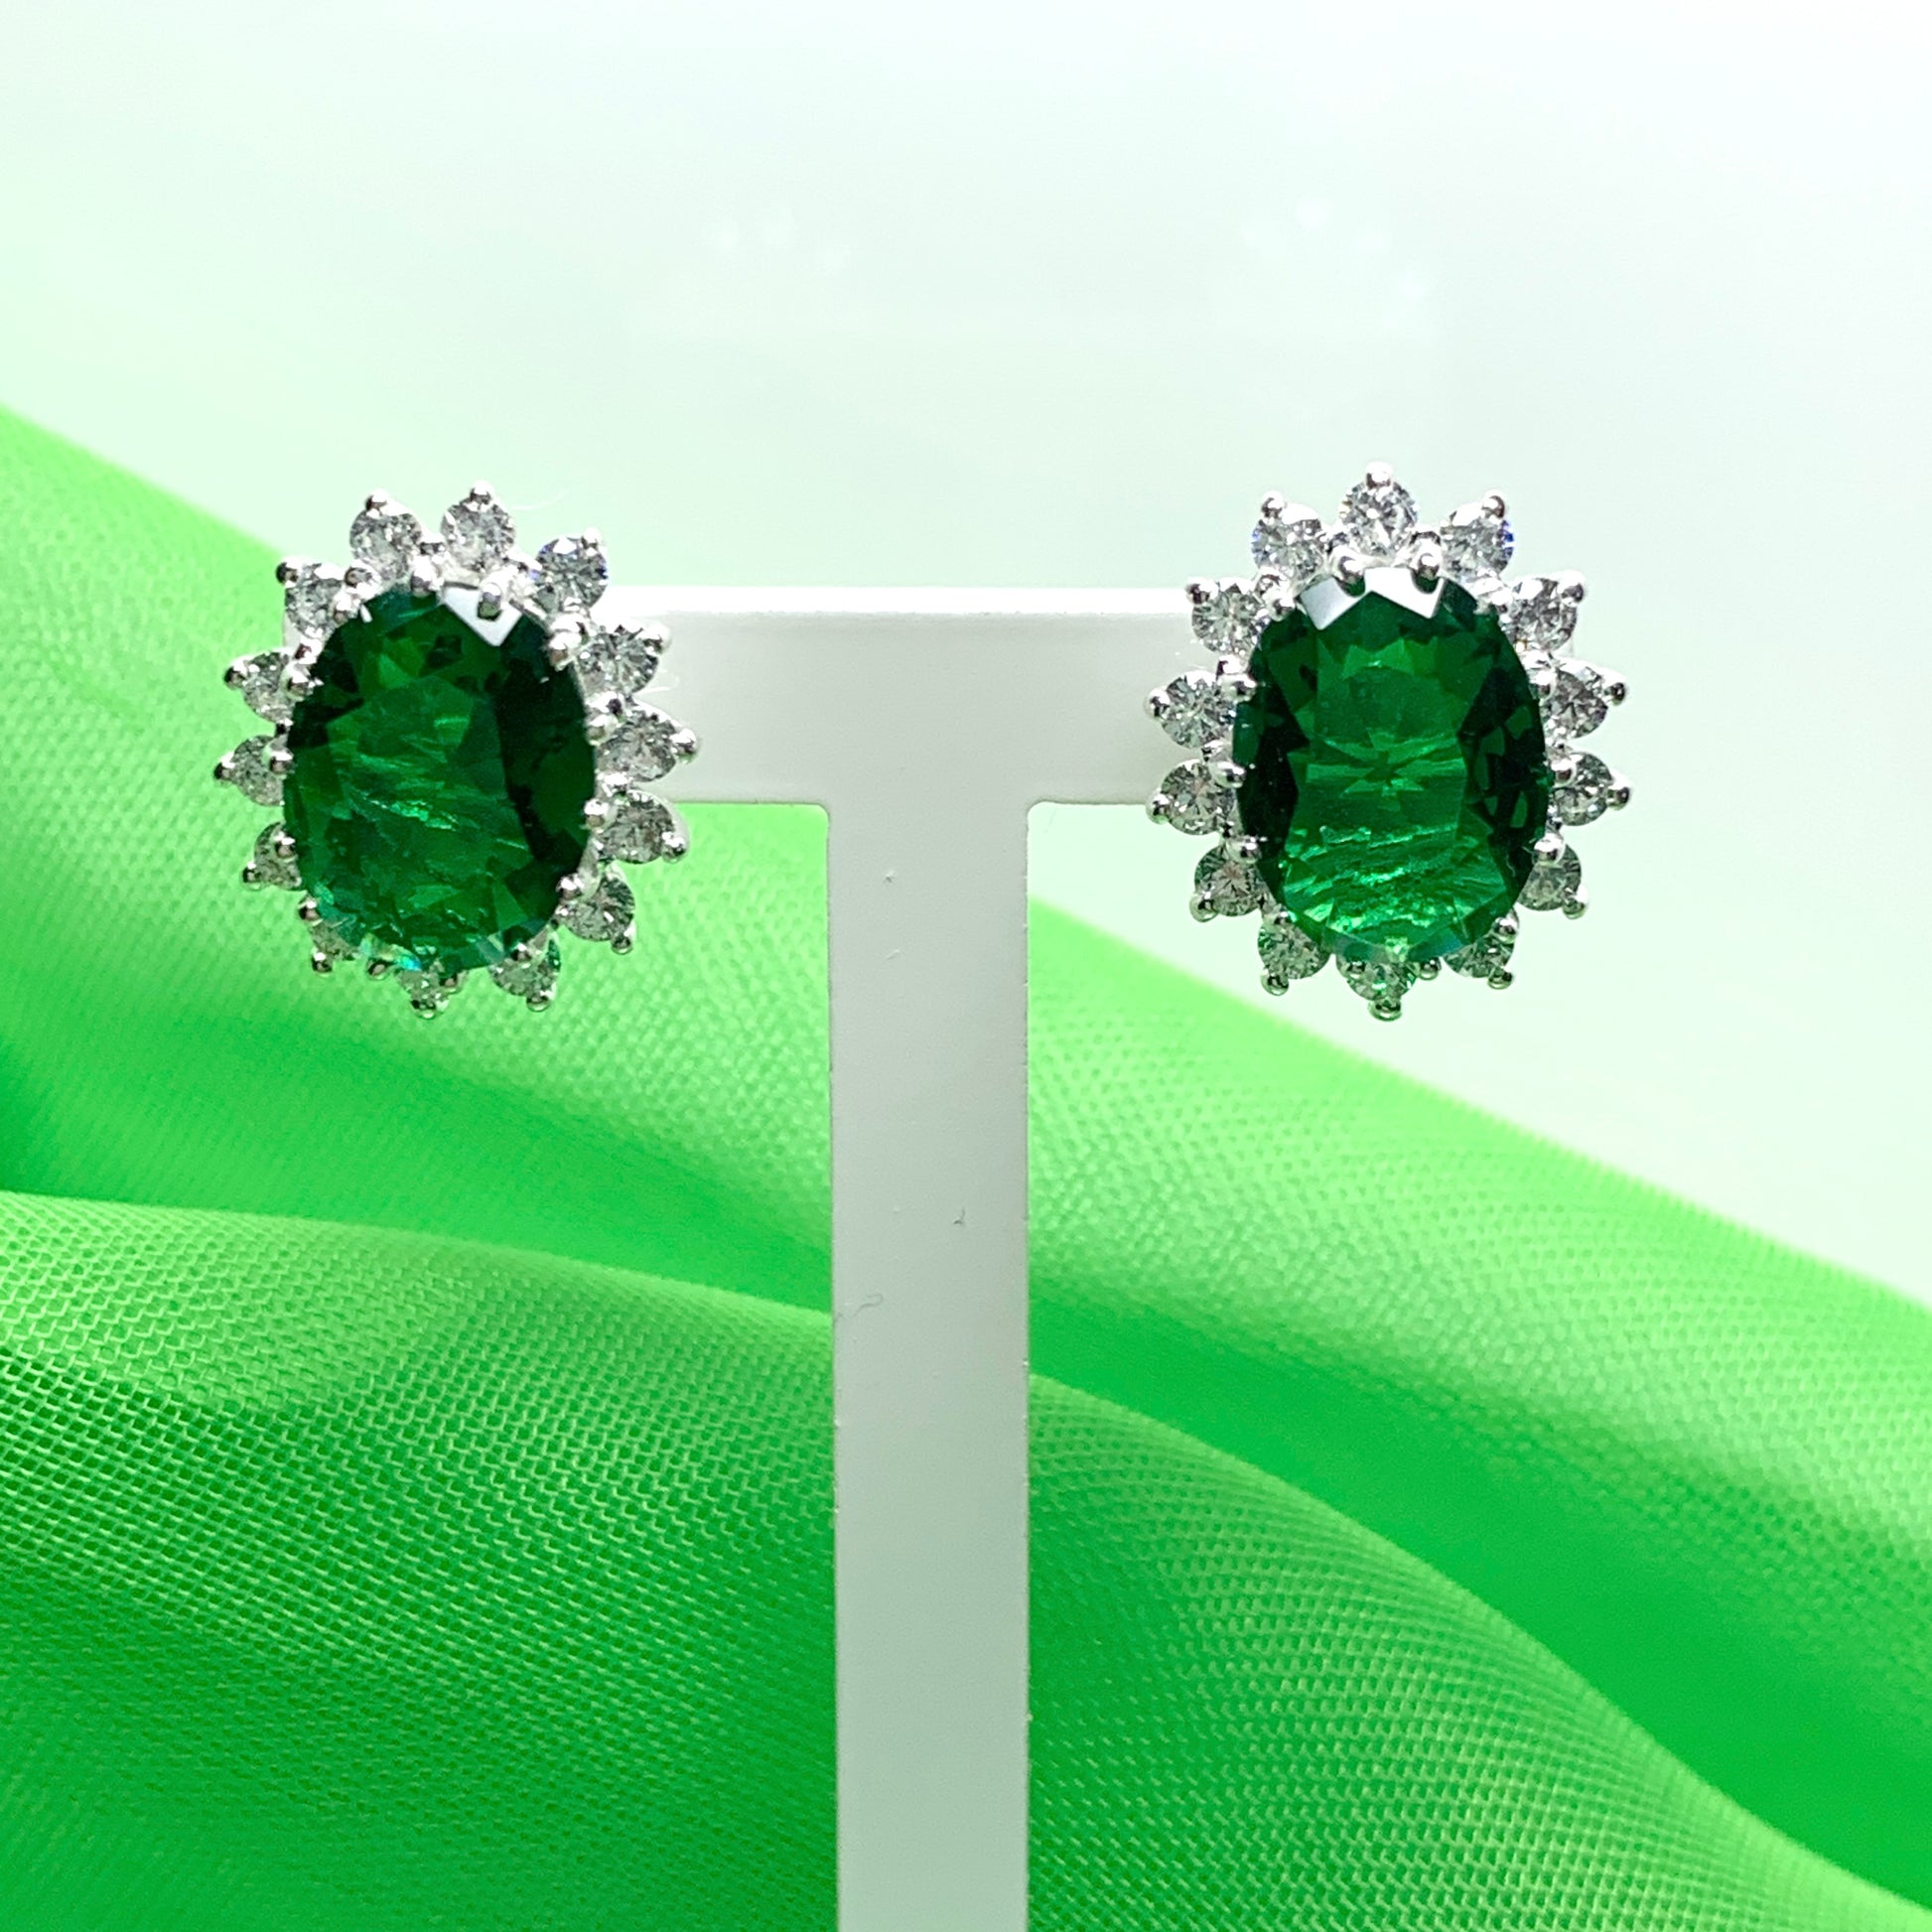 Large bright green and white cubic zirconia oval cluster dress cocktail stud earrings